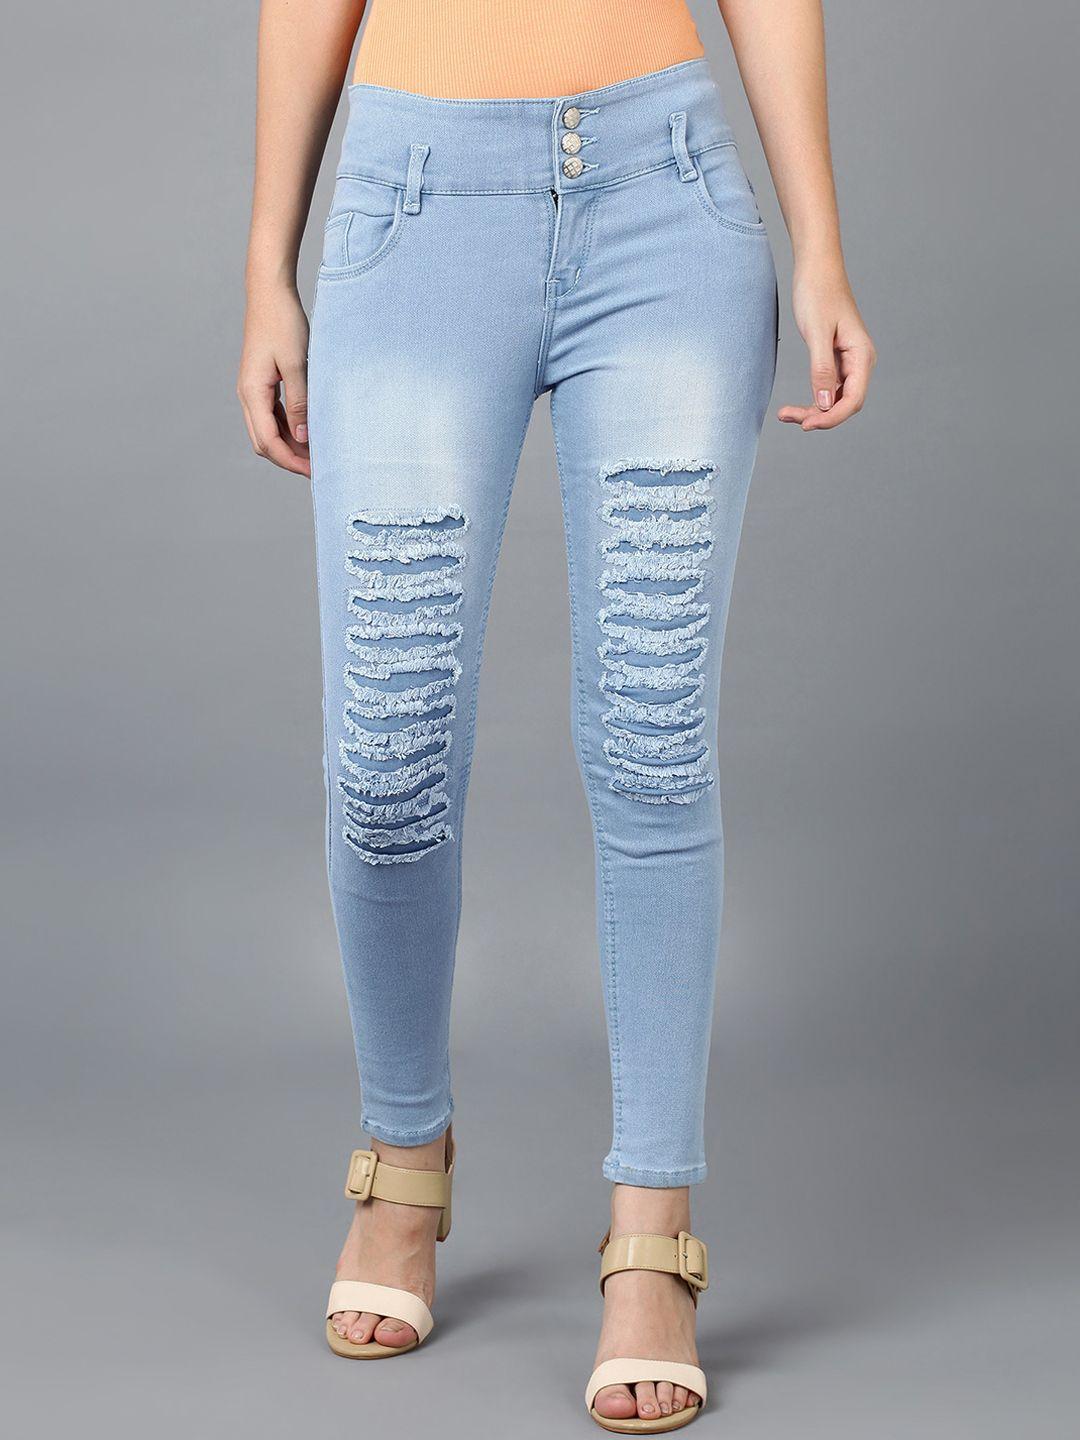 a-okay women skinny fit highly distressed heavy fade stretchable jeans